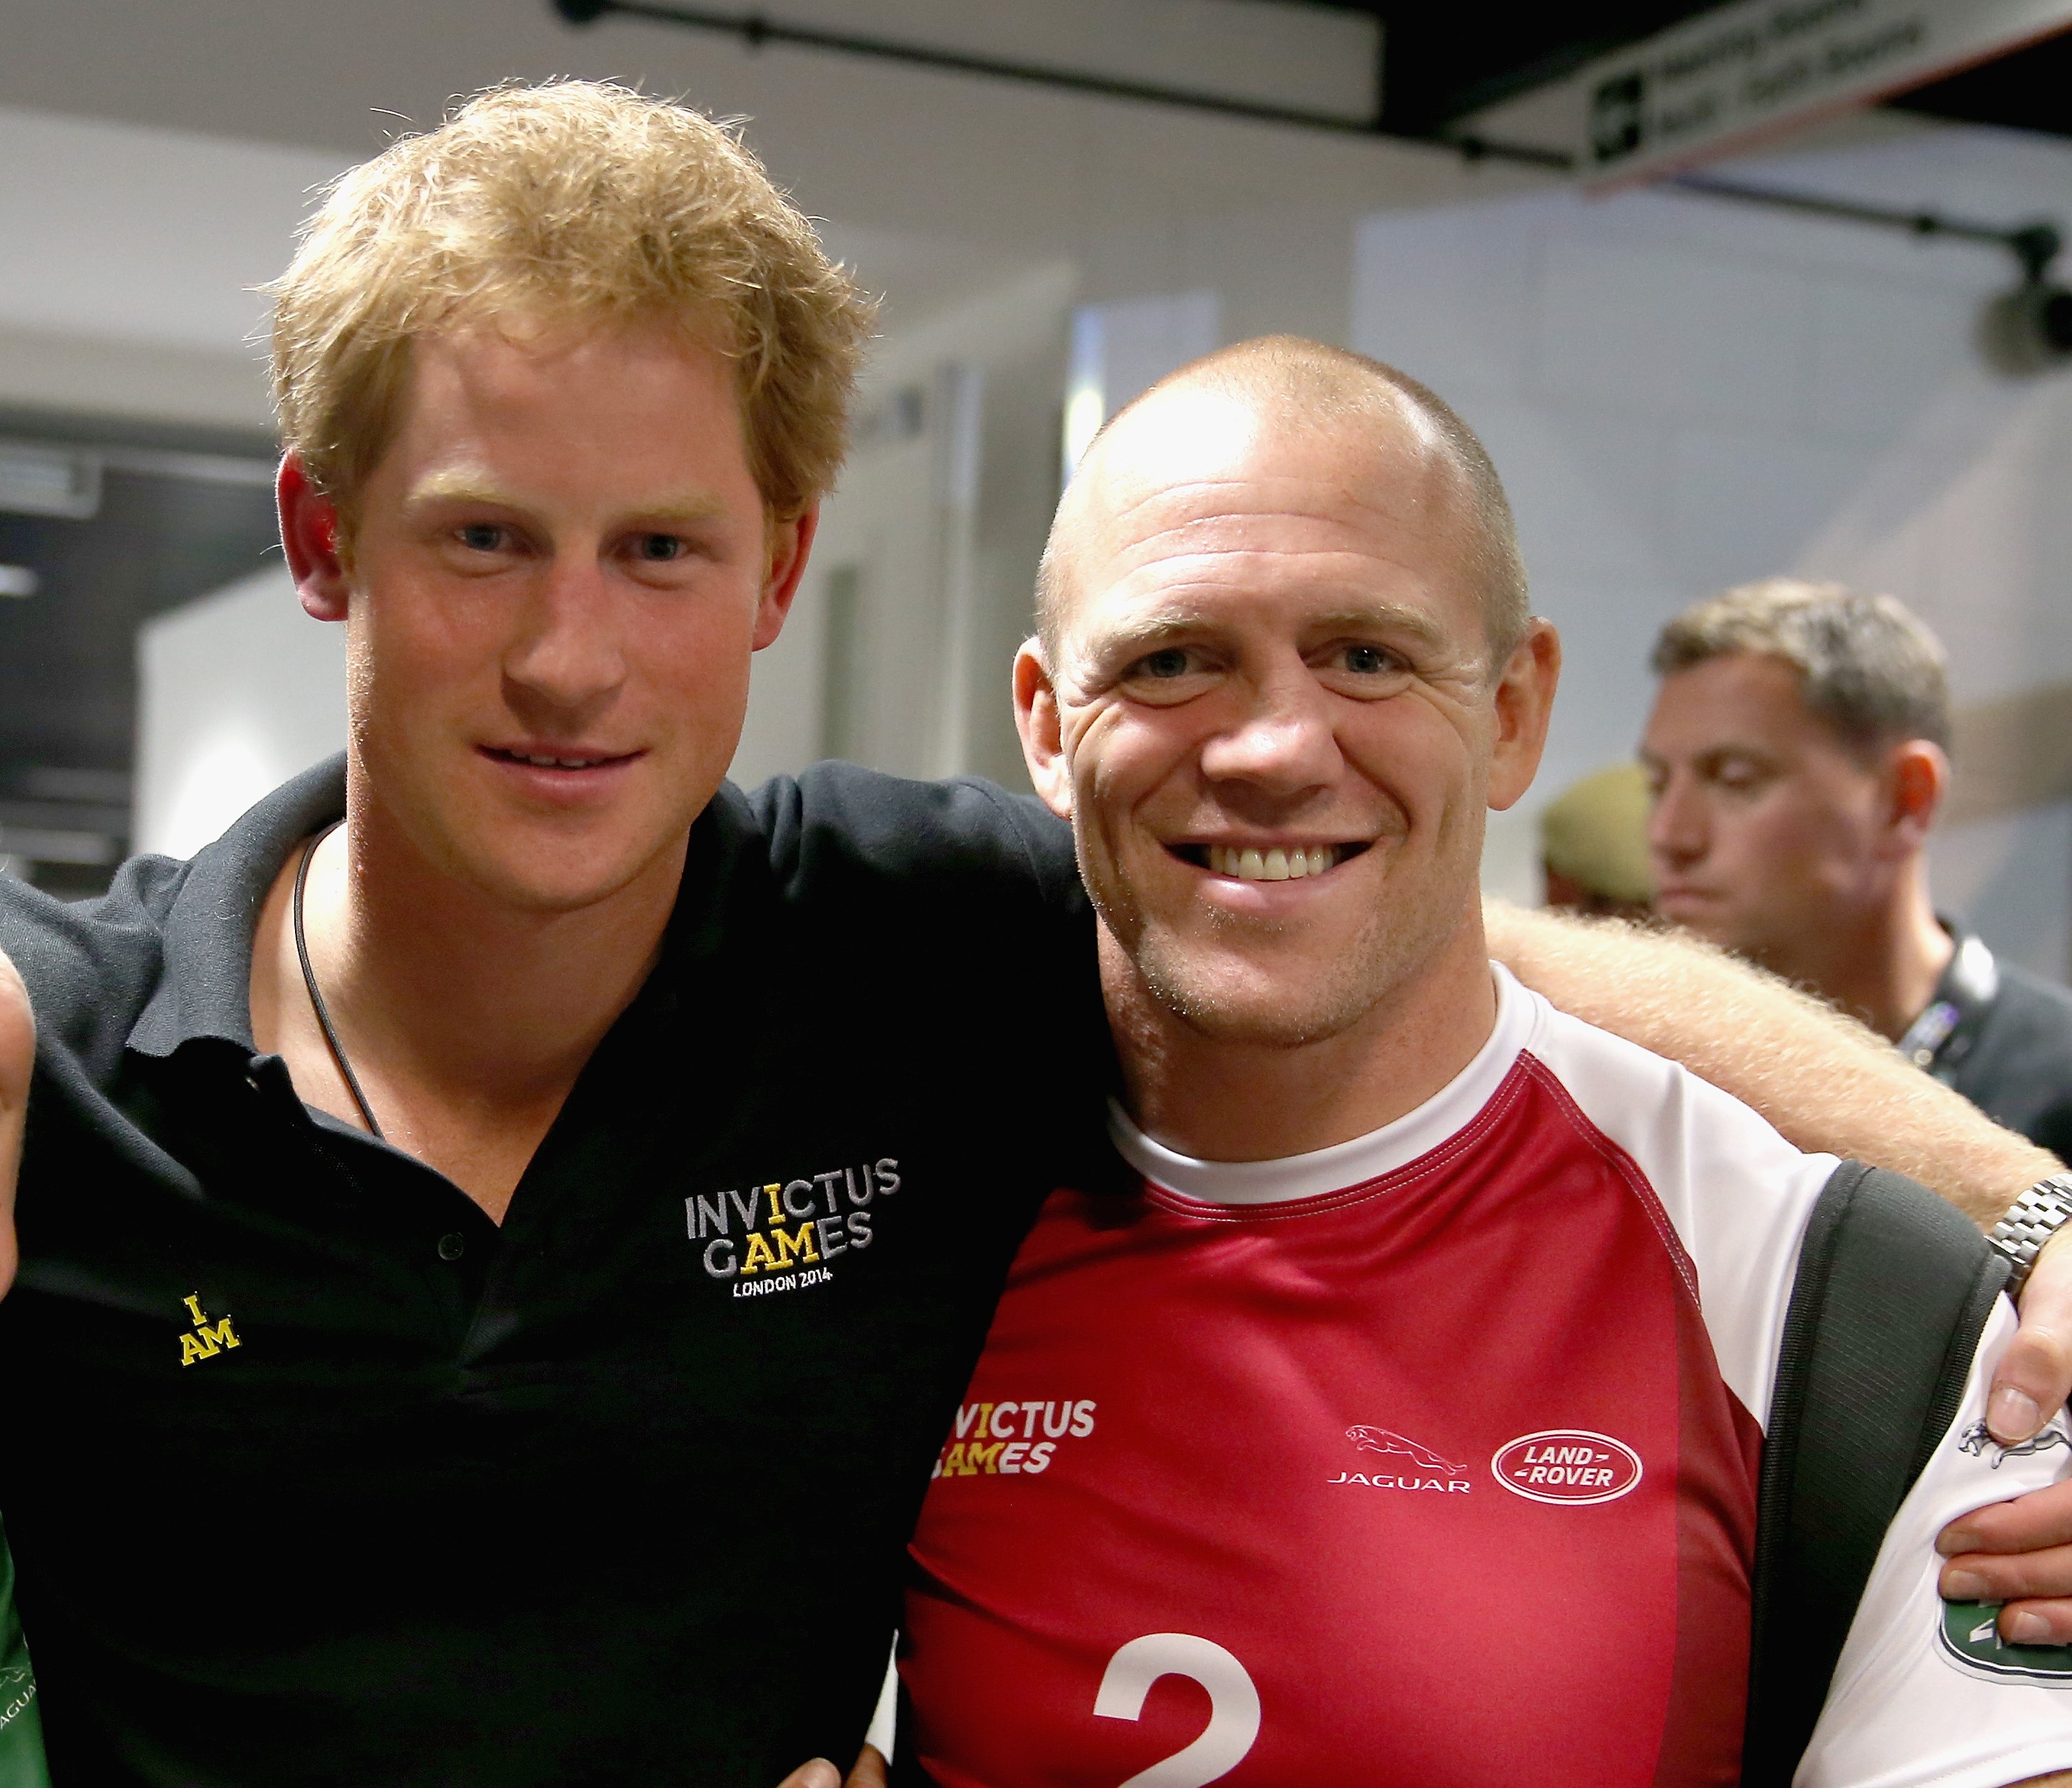 Prince Harry and Mike Tindall pose for a photograph after competing in an Exhibition wheelchair rugby match